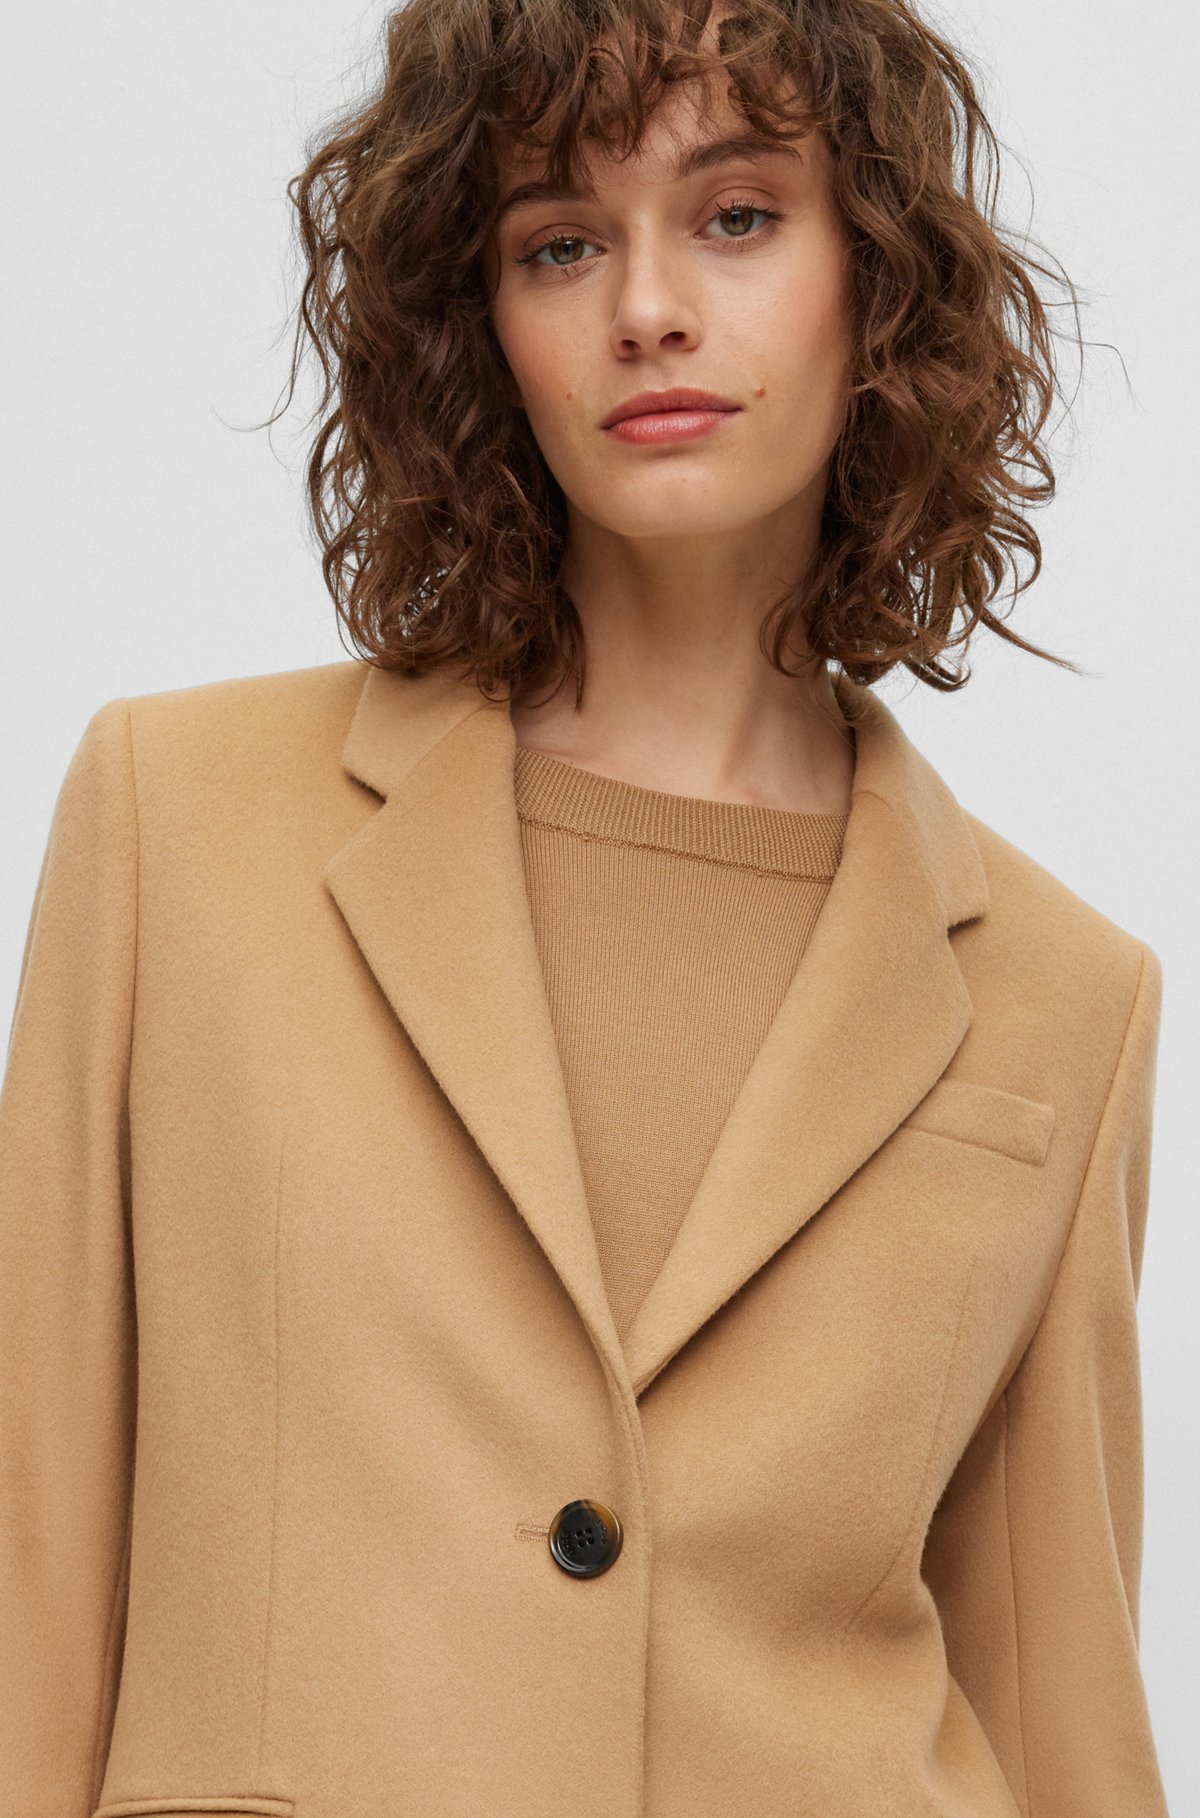 Slim-fit coat in wool and cashmere, Beige